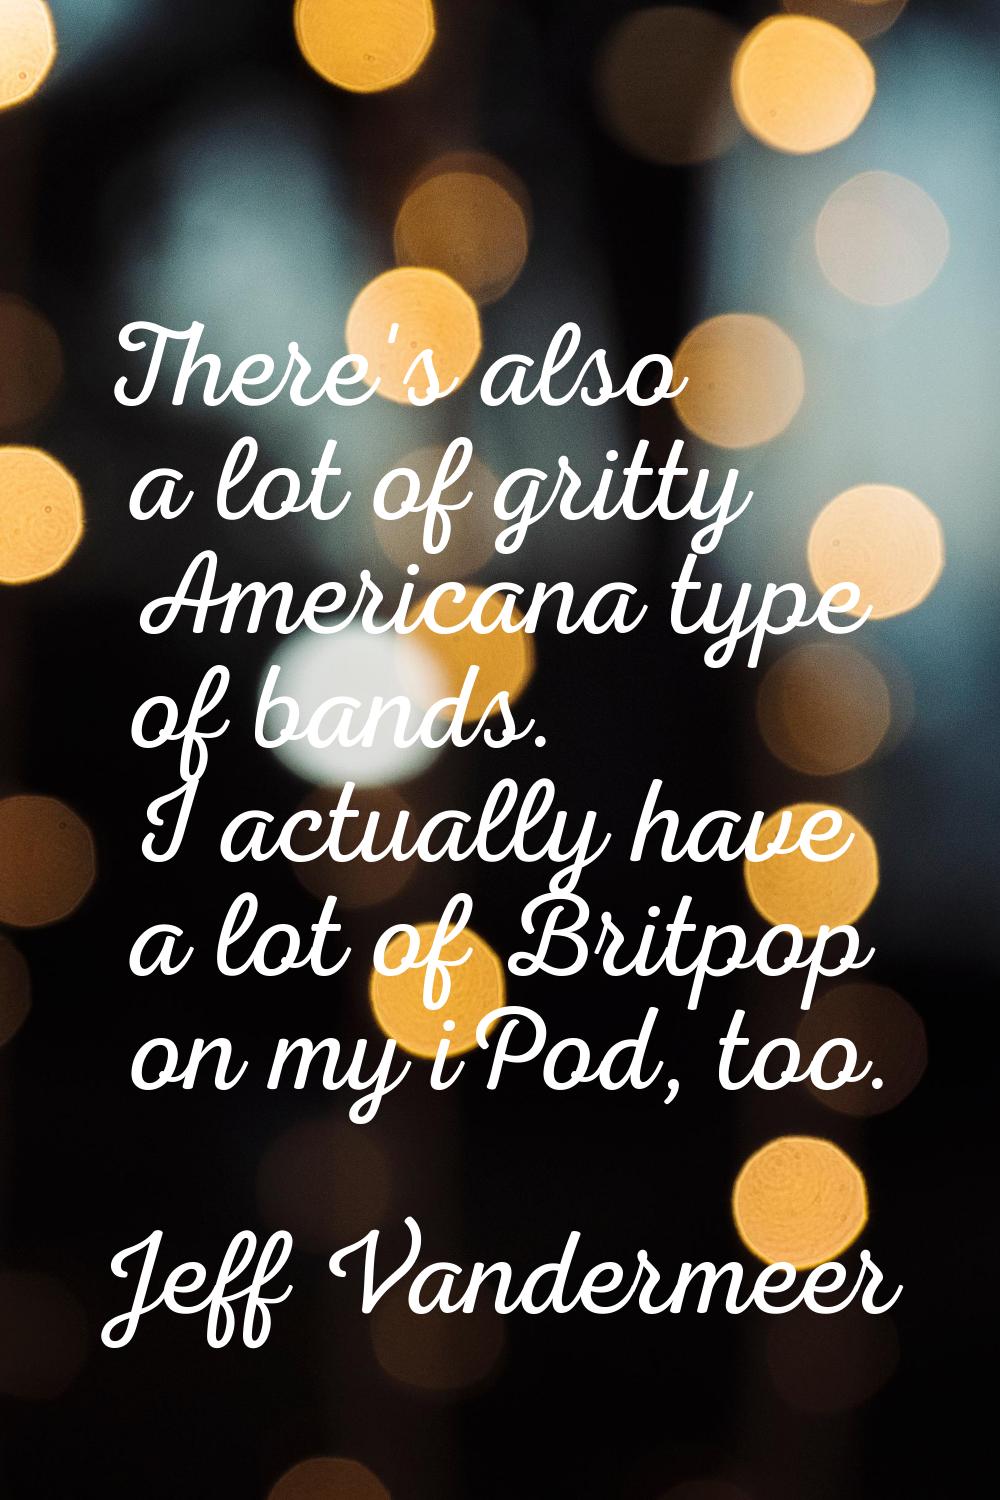 There's also a lot of gritty Americana type of bands. I actually have a lot of Britpop on my iPod, 